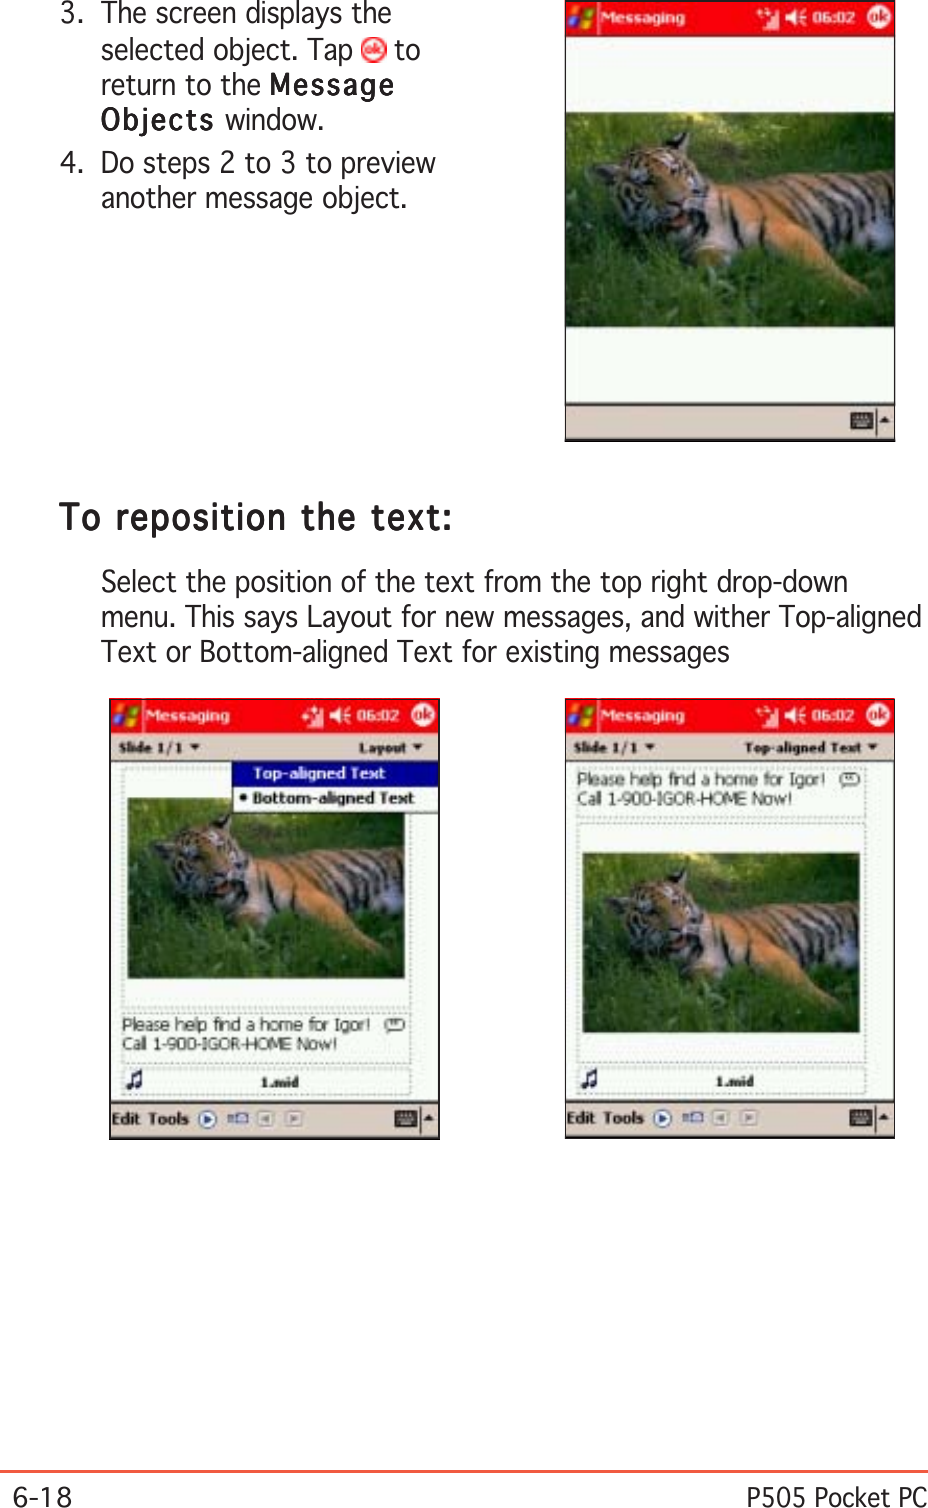 6-18P505 Pocket PCTo reposition the text:To reposition the text:To reposition the text:To reposition the text:To reposition the text:Select the position of the text from the top right drop-downmenu. This says Layout for new messages, and wither Top-alignedText or Bottom-aligned Text for existing messages3. The screen displays theselected object. Tap   toreturn to the MessageMessageMessageMessageMessageObjectsObjectsObjectsObjectsObjects window.4. Do steps 2 to 3 to previewanother message object.